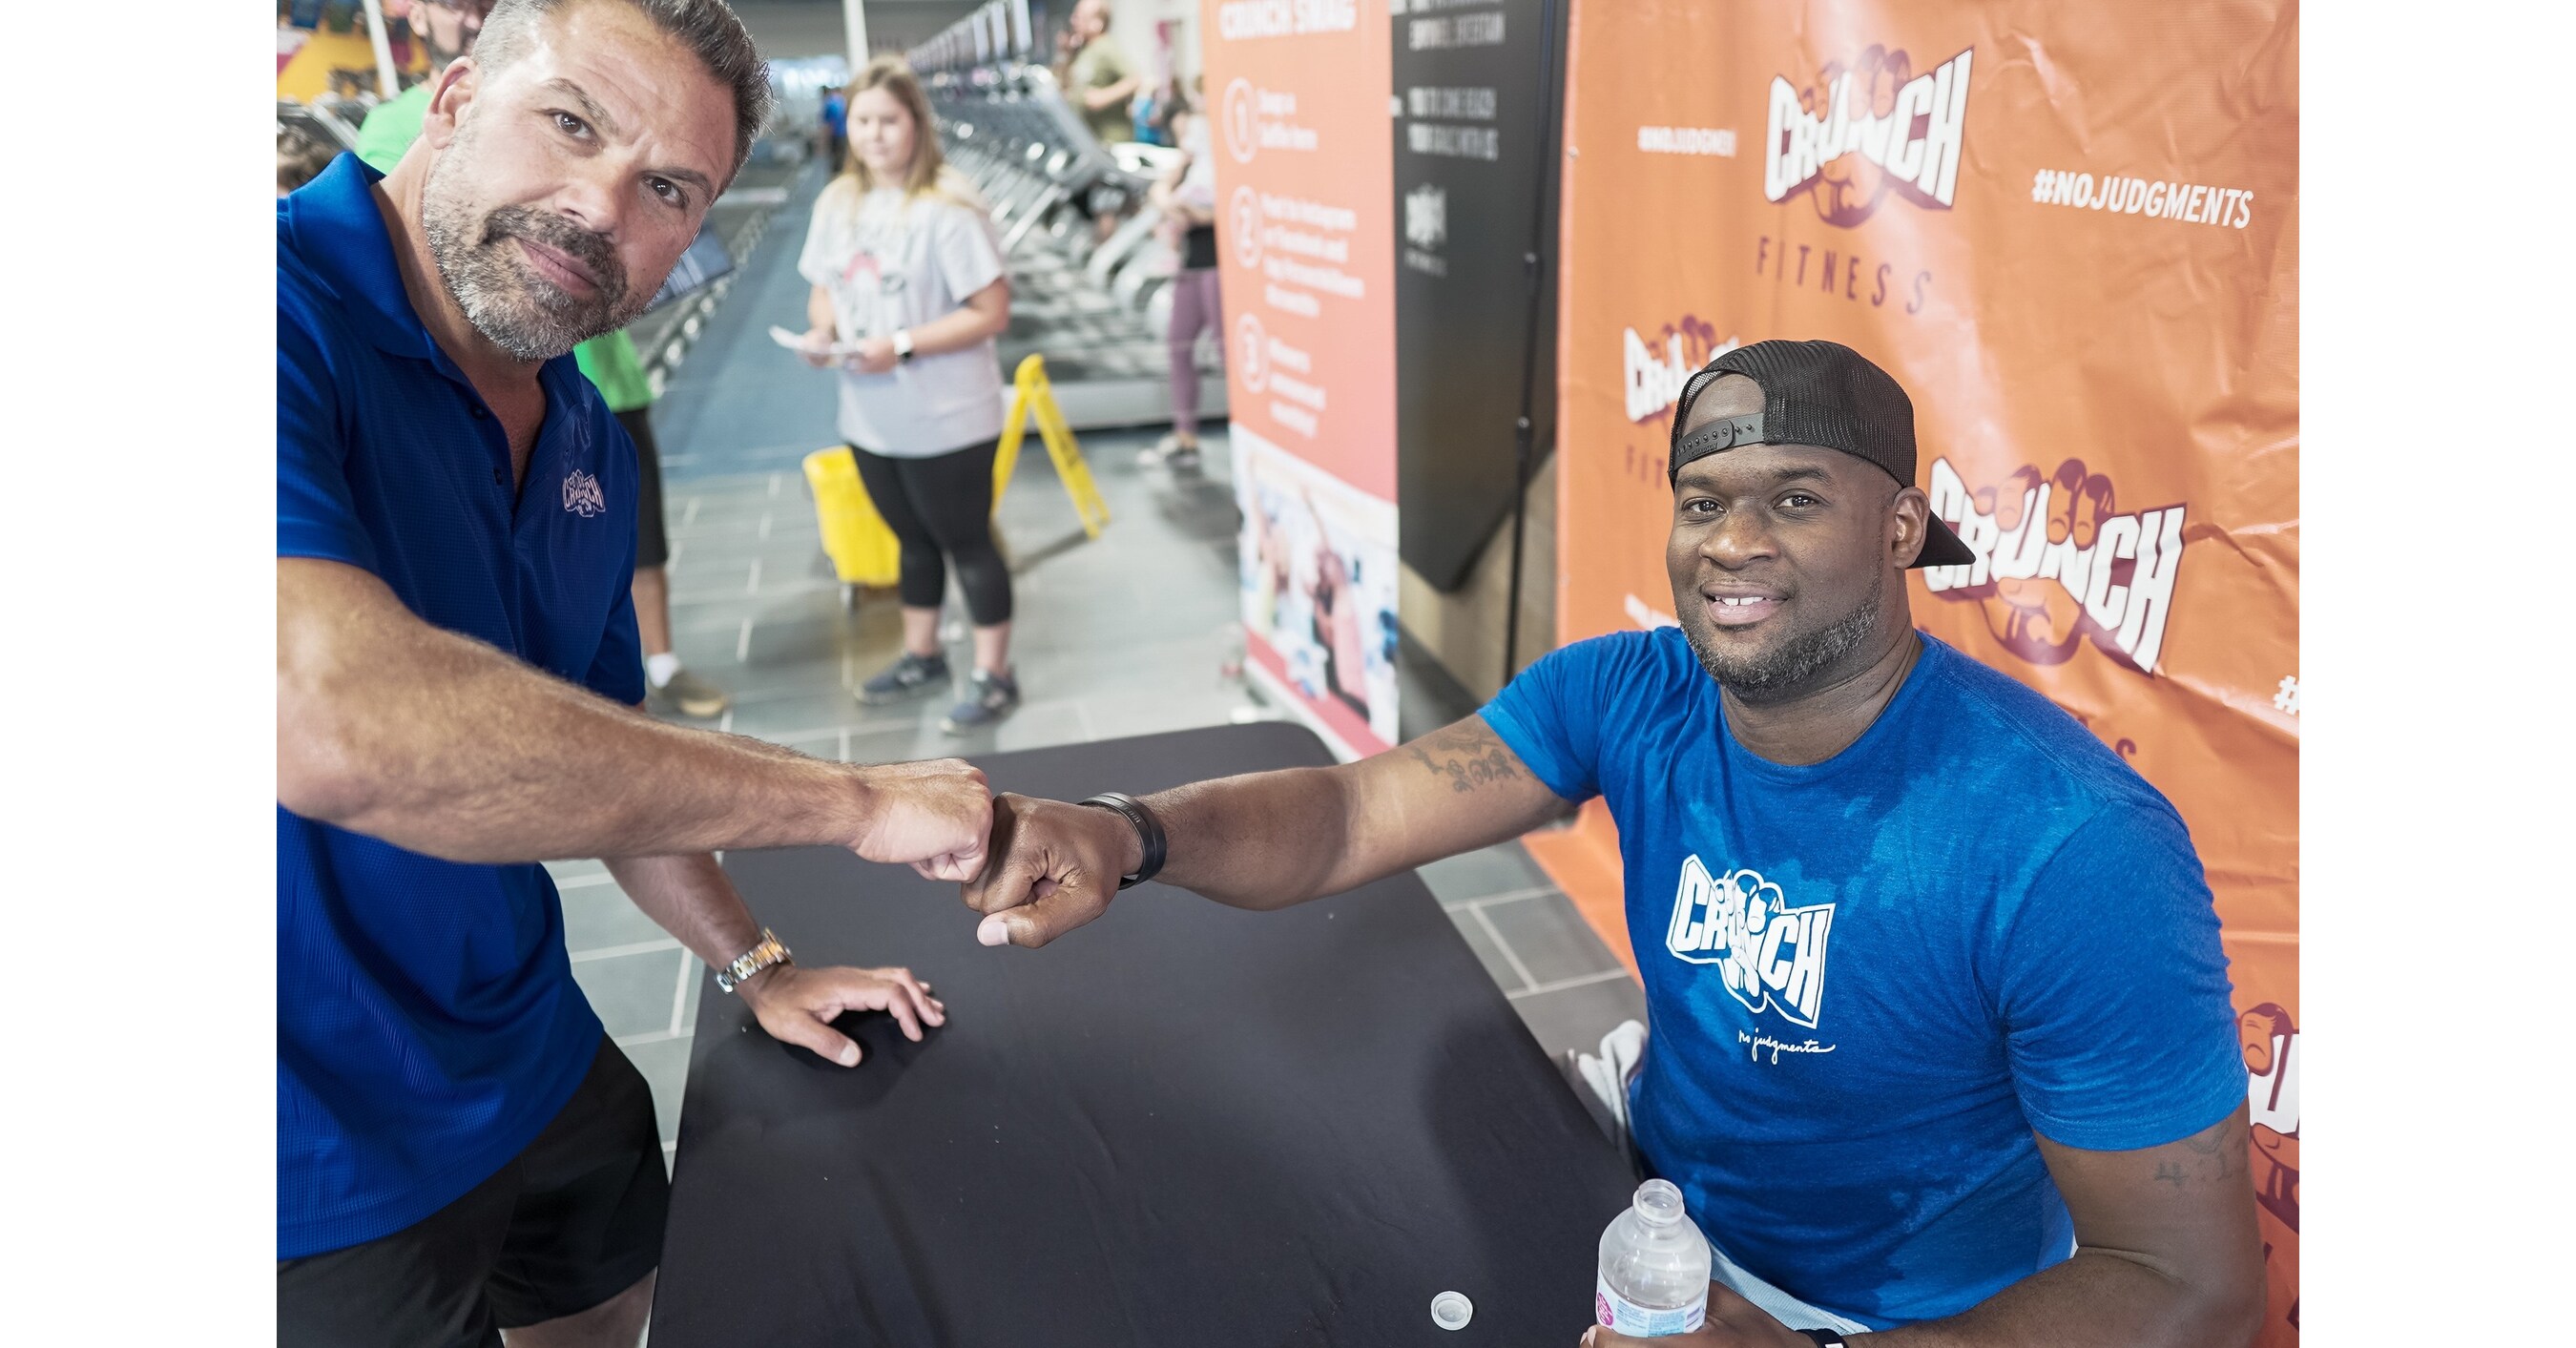 Crunch Fitness Cedar Park Previews  Million Gym with Texas Football Legend Vince Young